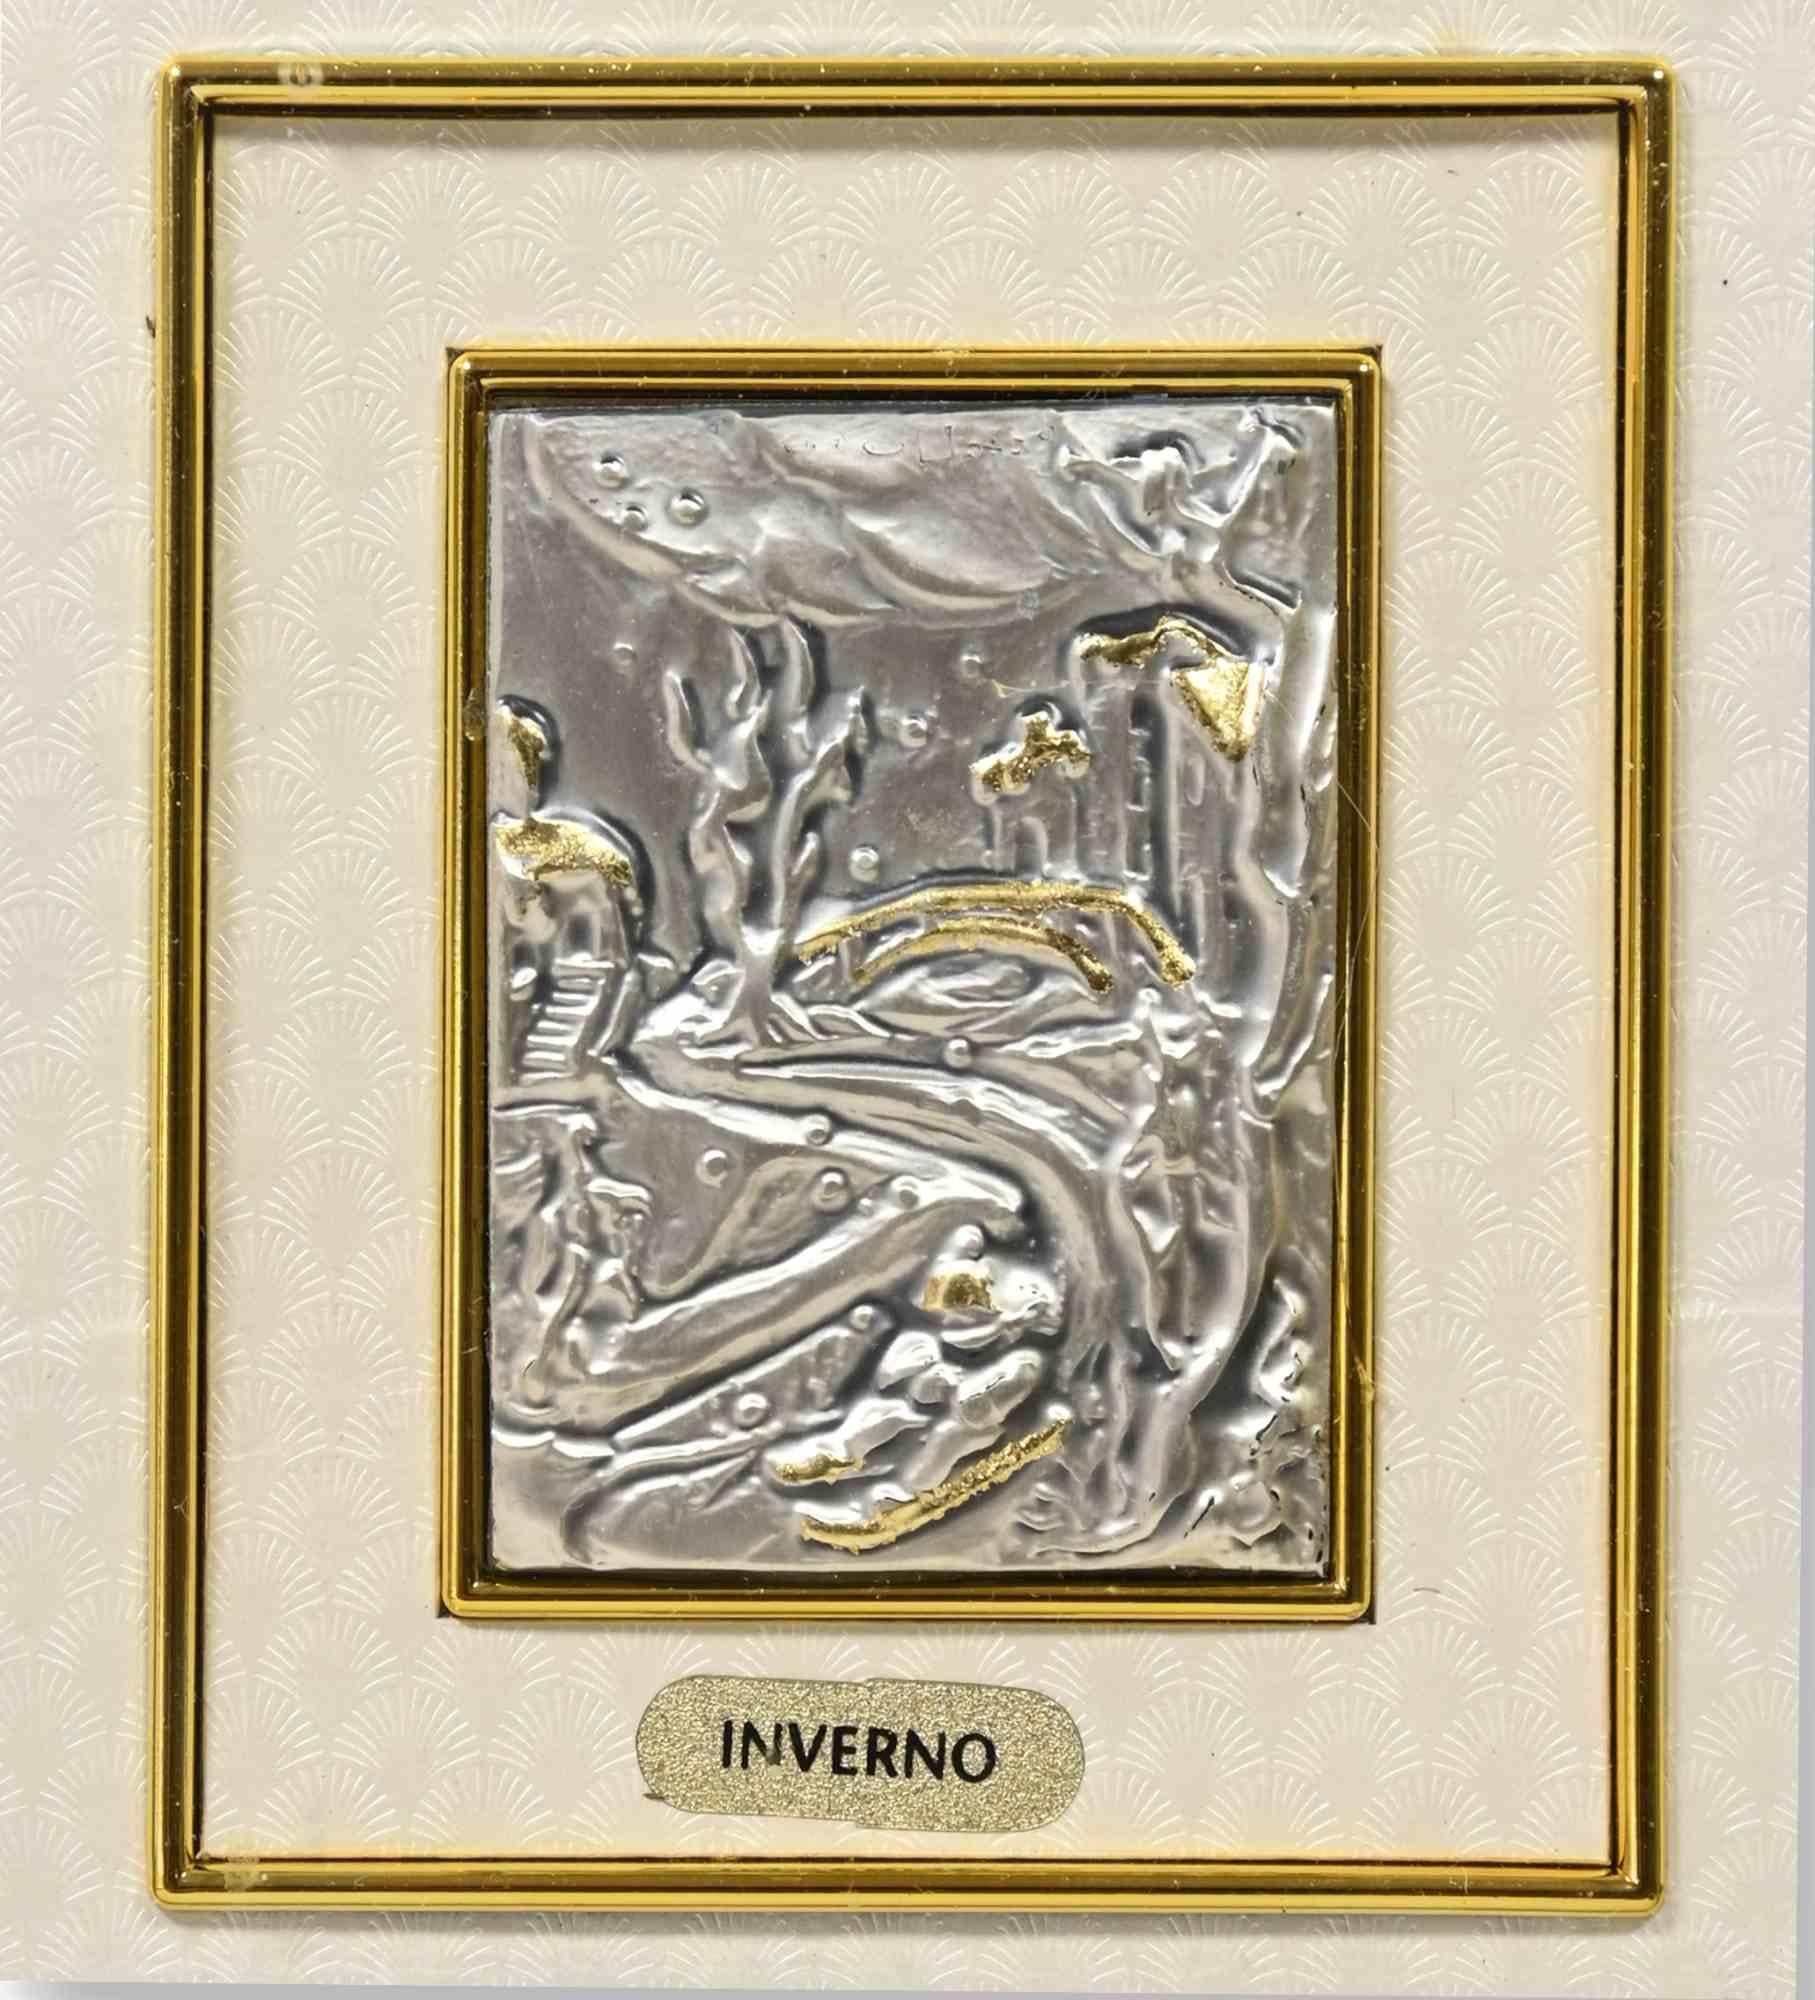 Winter is an original modern artwork realized in the 1970s.

Realized by Euroesse (label on the back)

The artwork is realized on silver plate and gold leaf.

Includes frame.